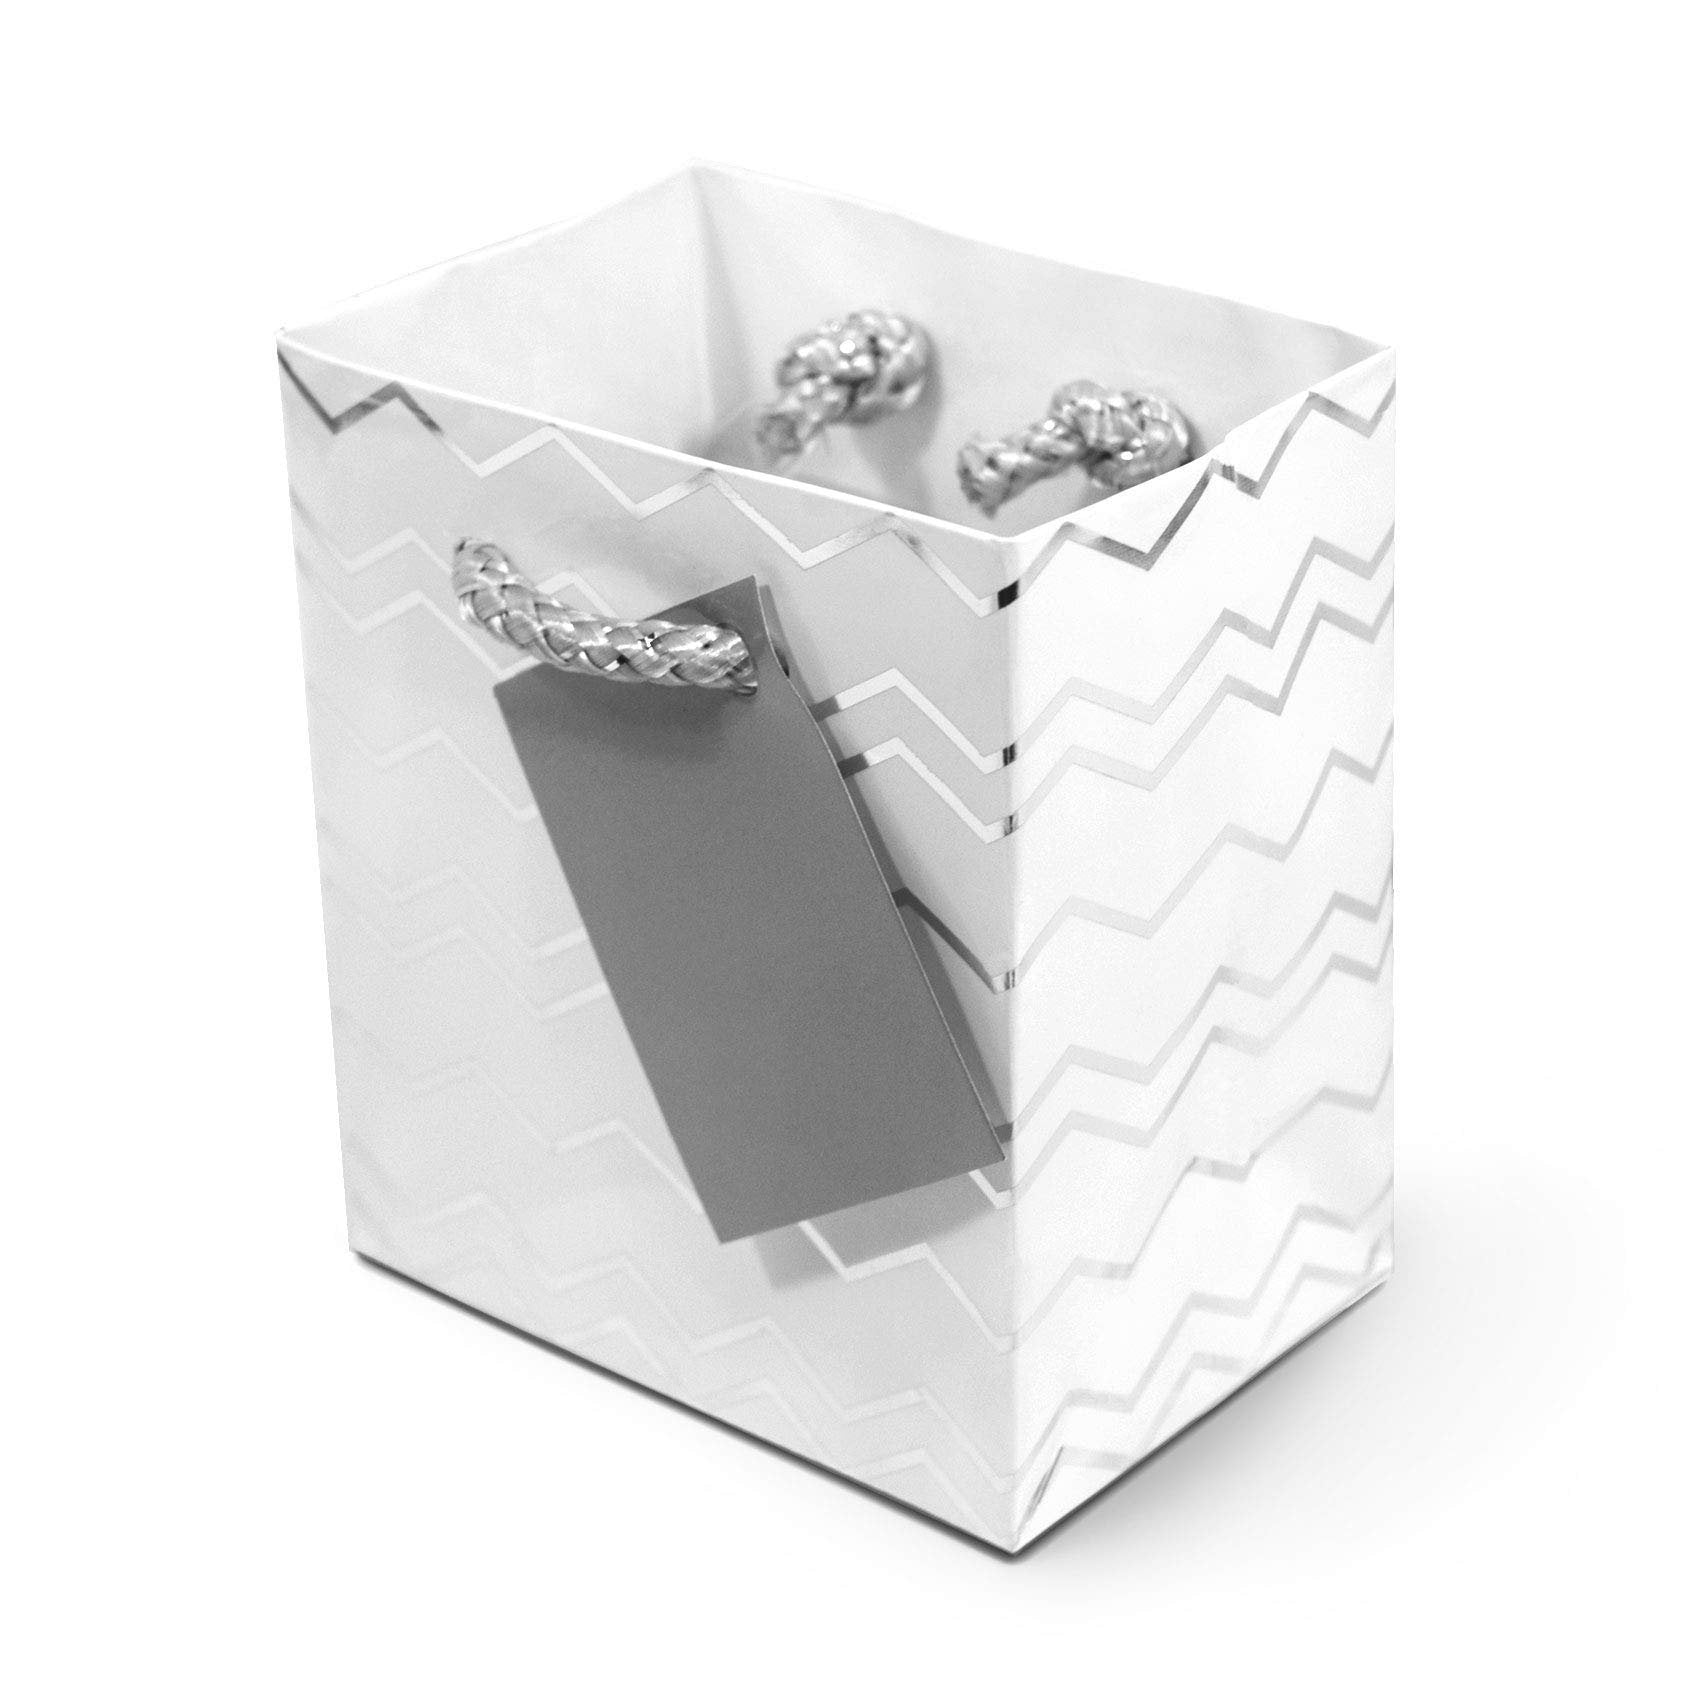 Silver Gift Bags - 12 Pack Mini Metallic Paper Gift Bags with Handles, Chevron, Polka Dot & Stripe, Extra Small Gift Wrap Euro Totes for Birthday Parties, Weddings, Holidays Bulk - 4x4.5x2.75